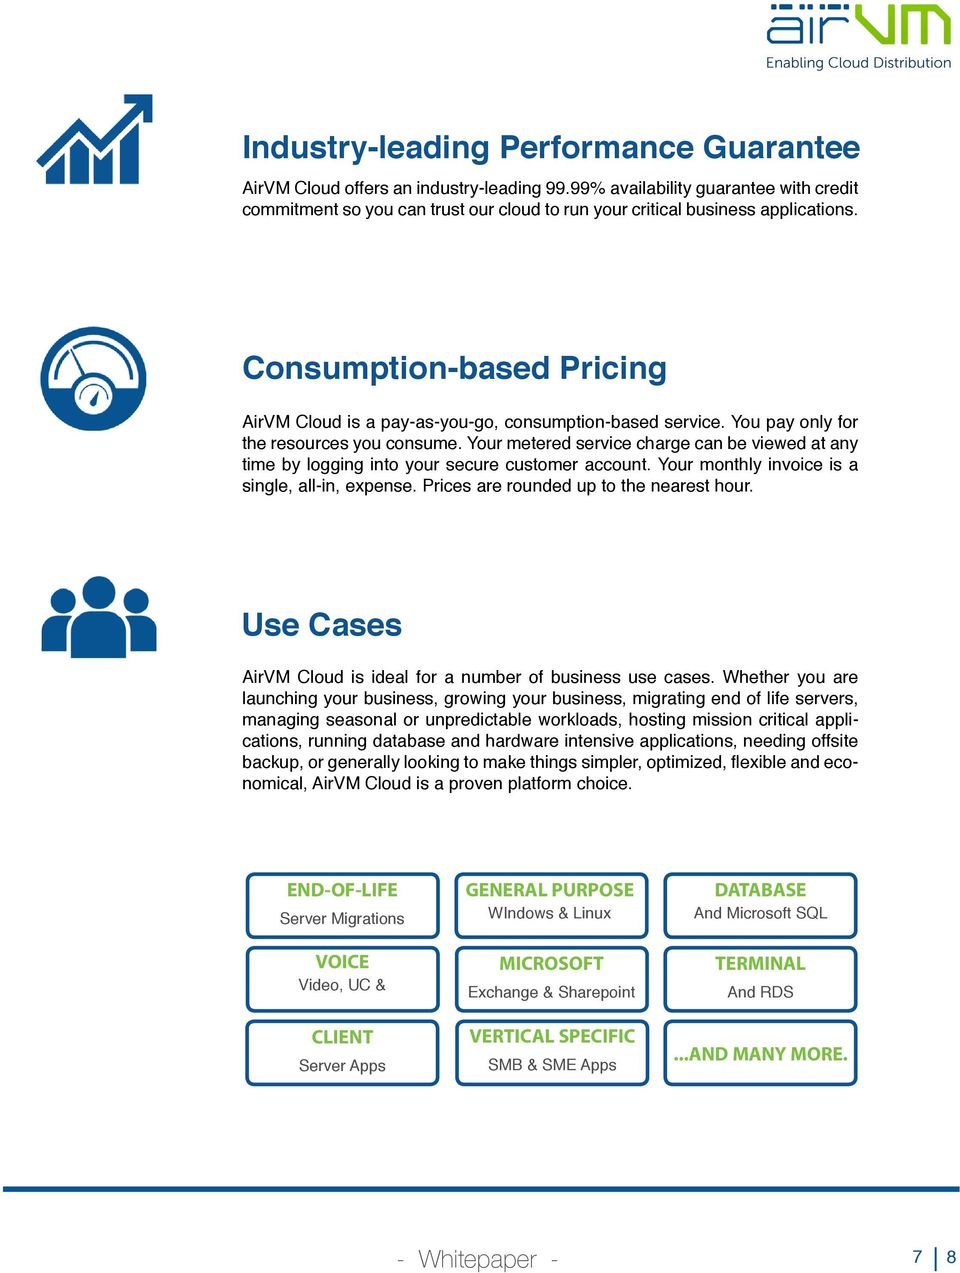 Consumption-based Pricing AirVM Cloud is a pay-as-you-go, consumption-based service. You pay only for the resources you consume.